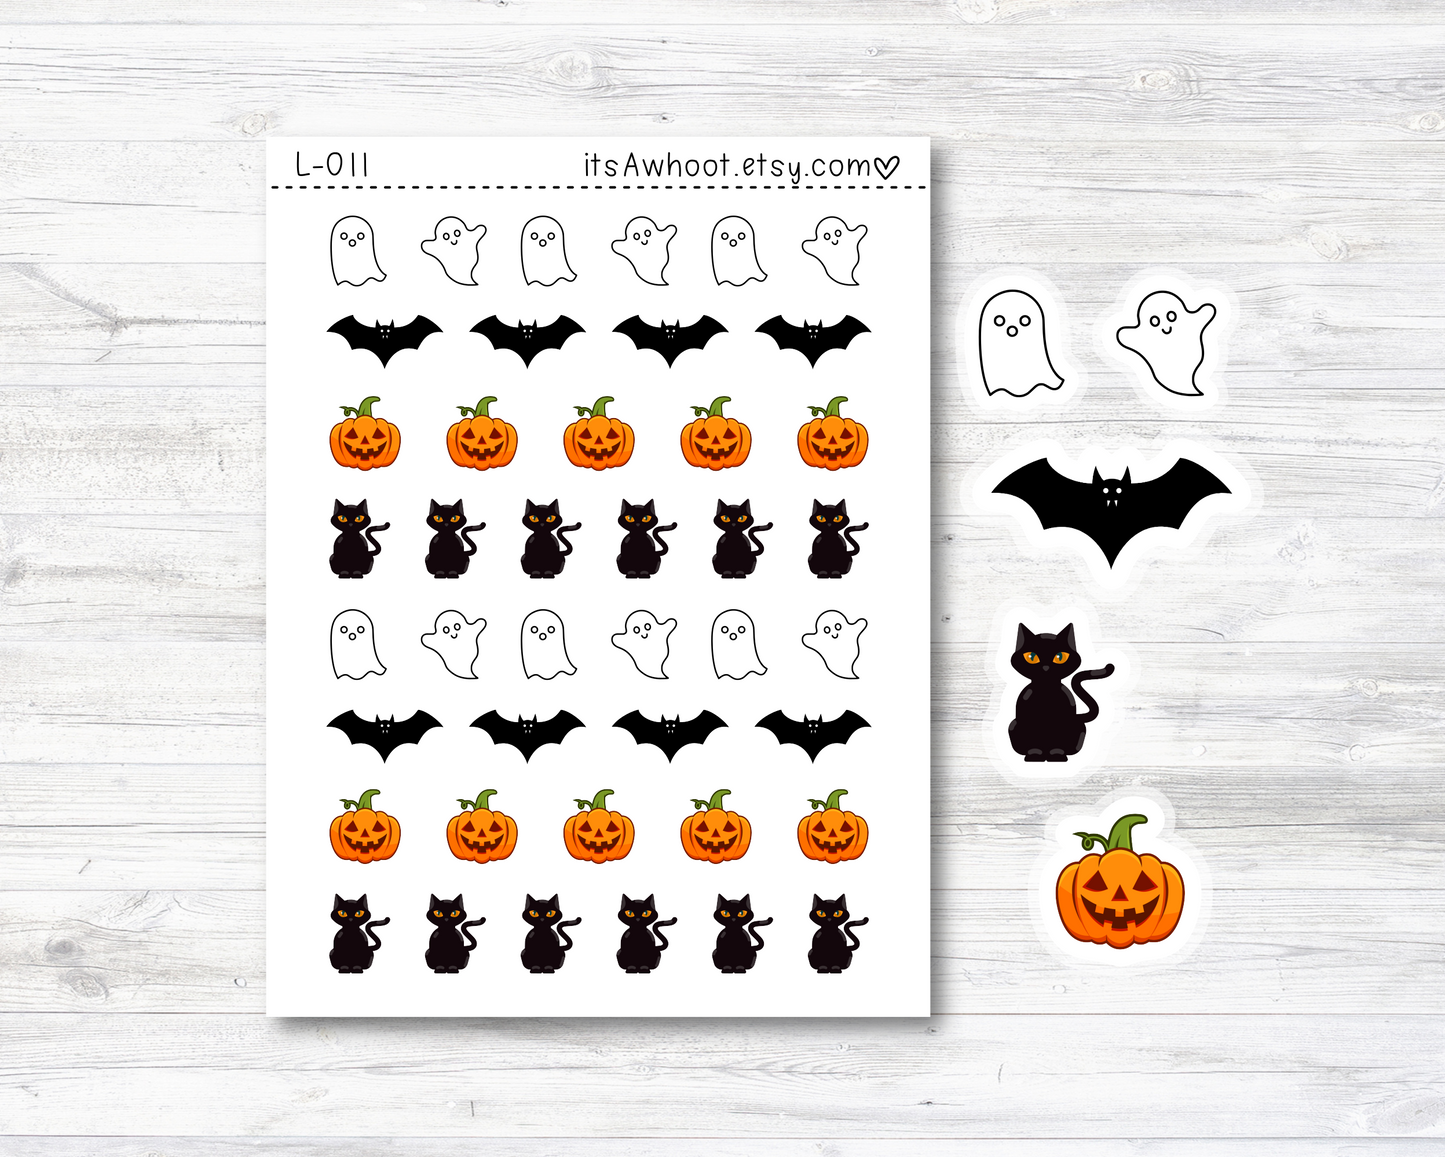 Halloween Mix Stickers - SMALL DECO SHEET .5" Stickers (L011)